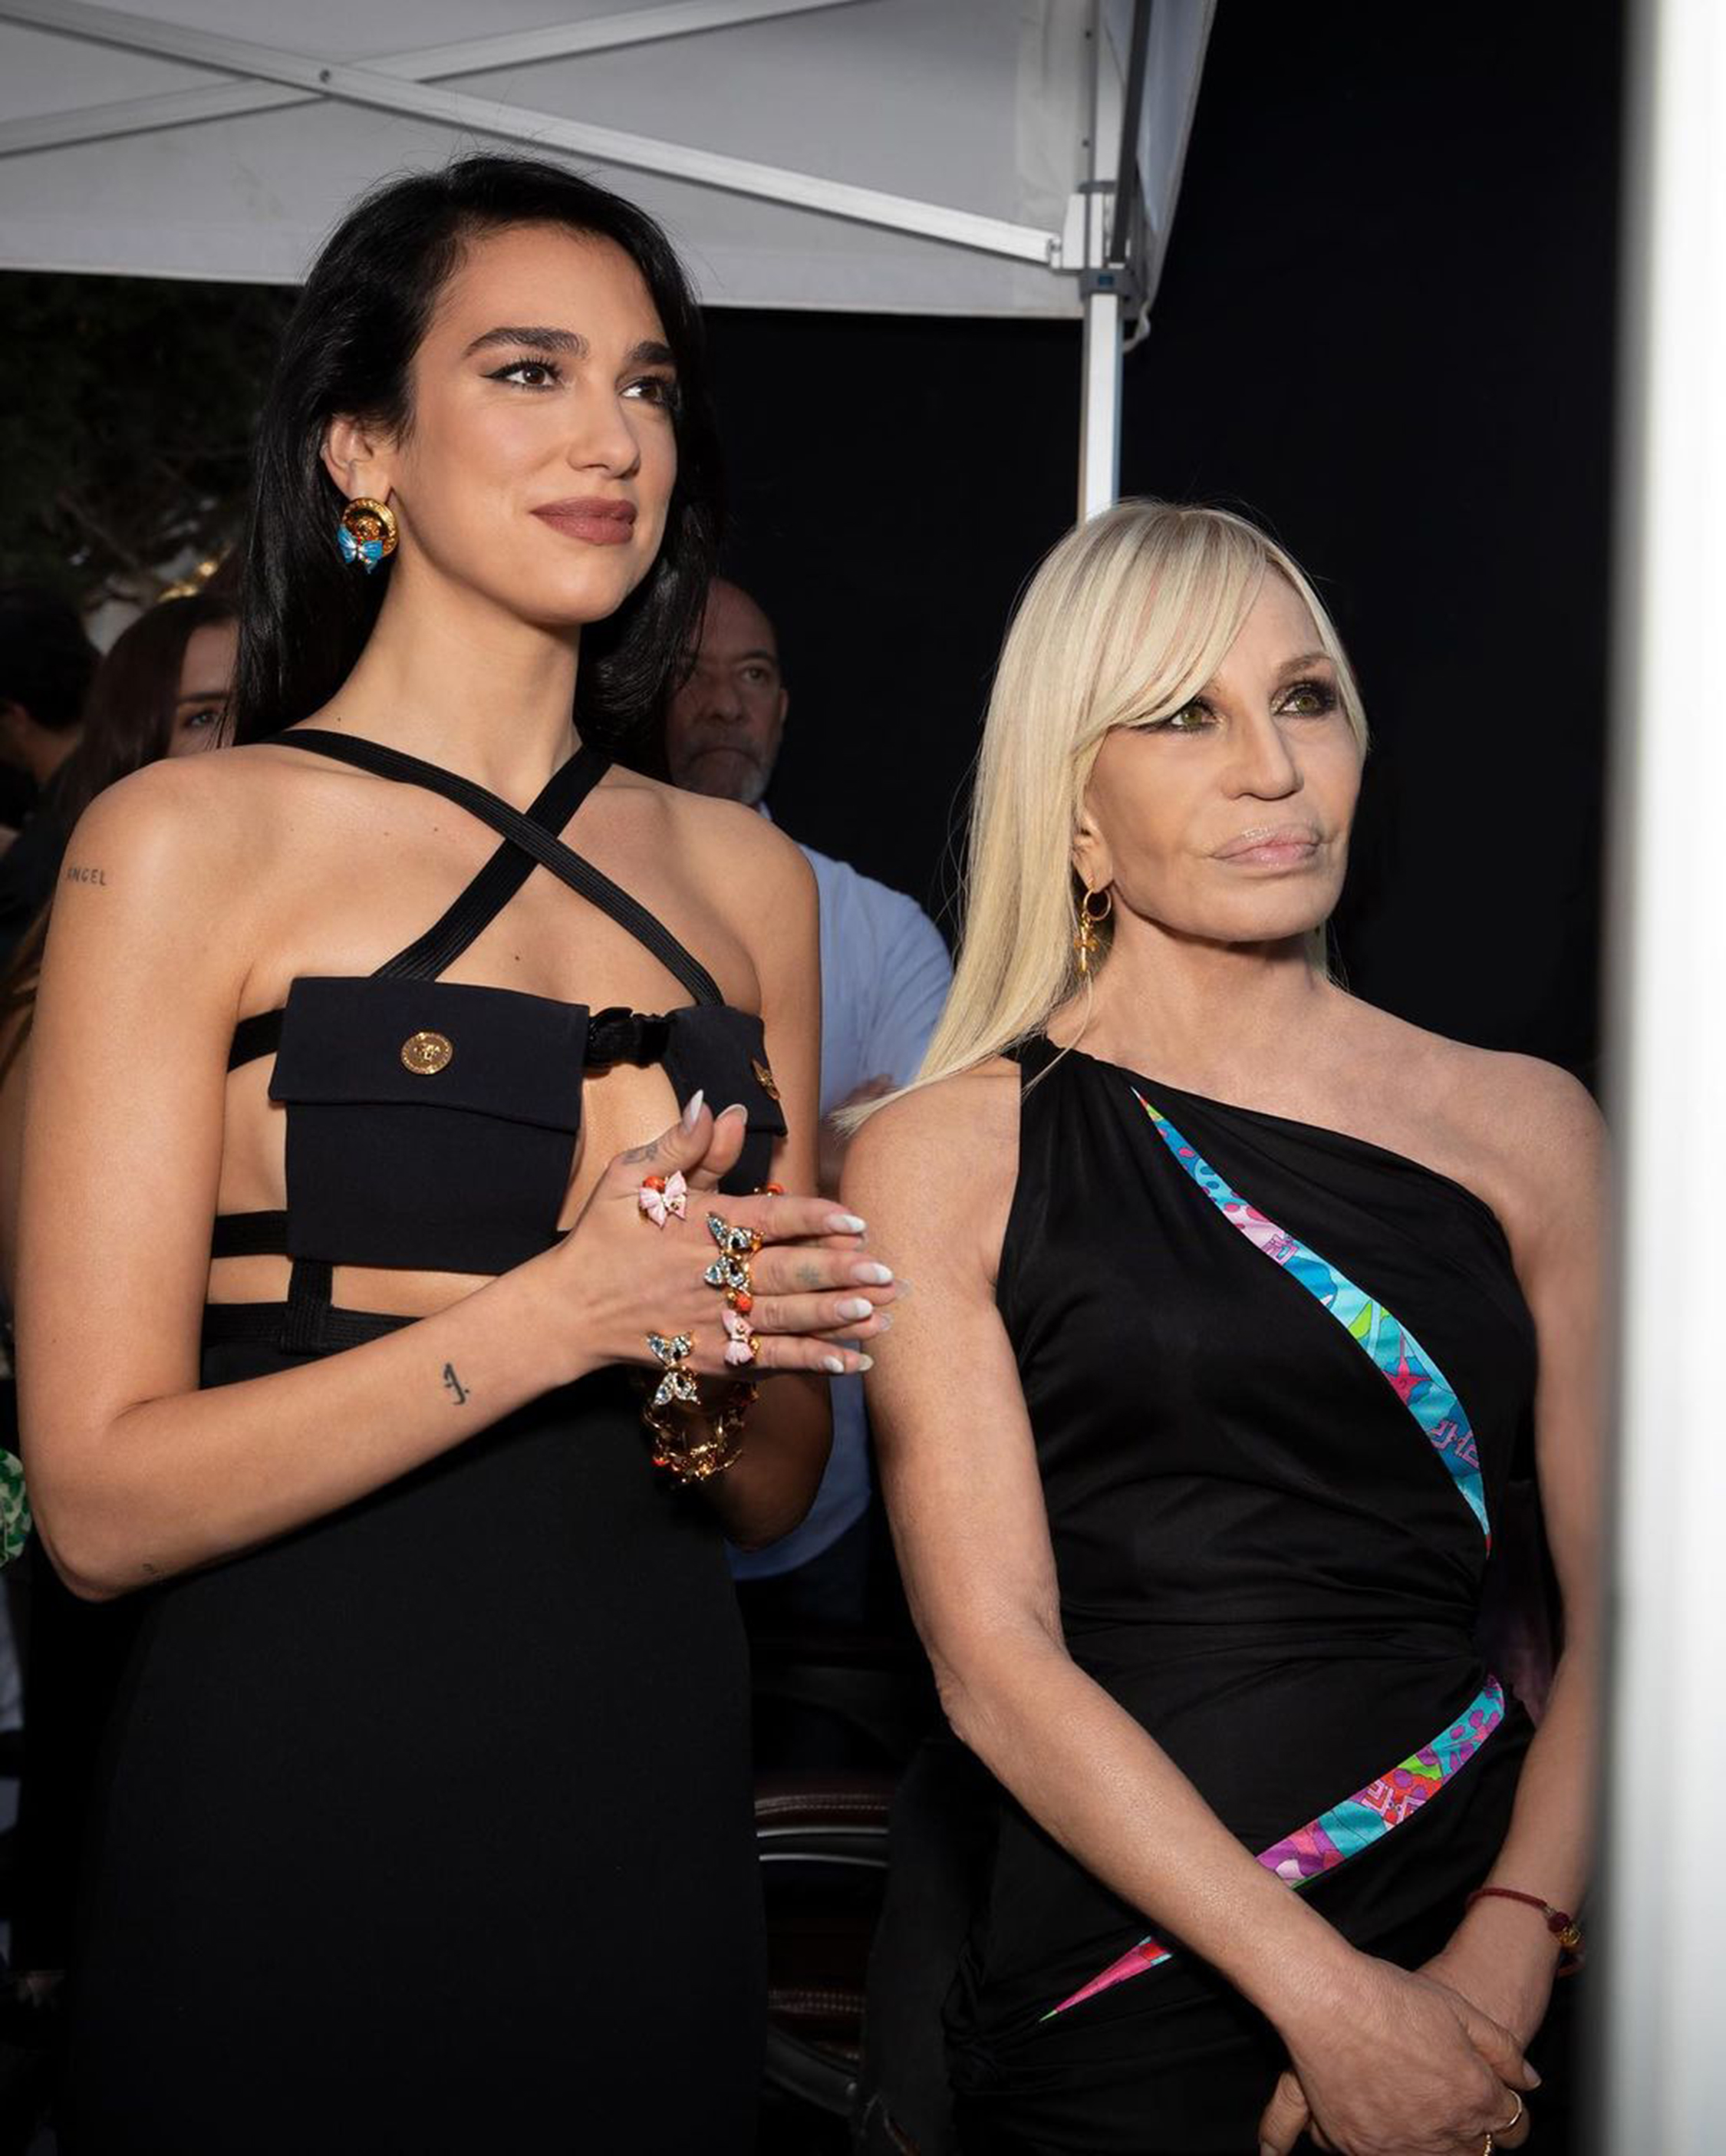 Dua said that she and Donnatella Versace bonded while making the collection together